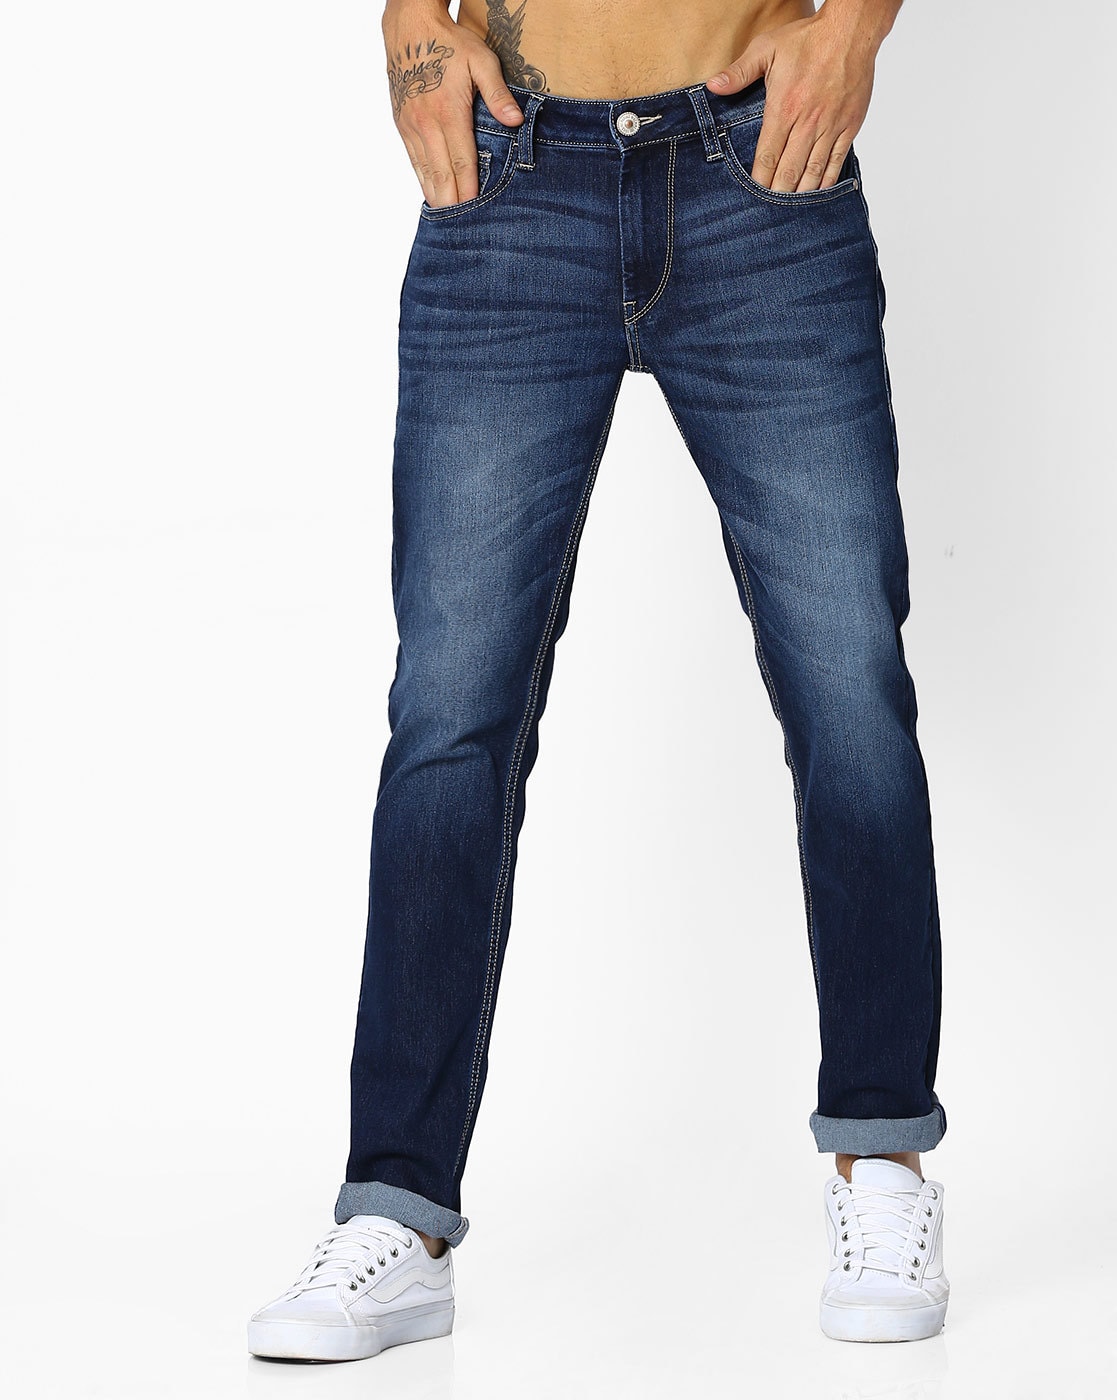 purchase jeans online